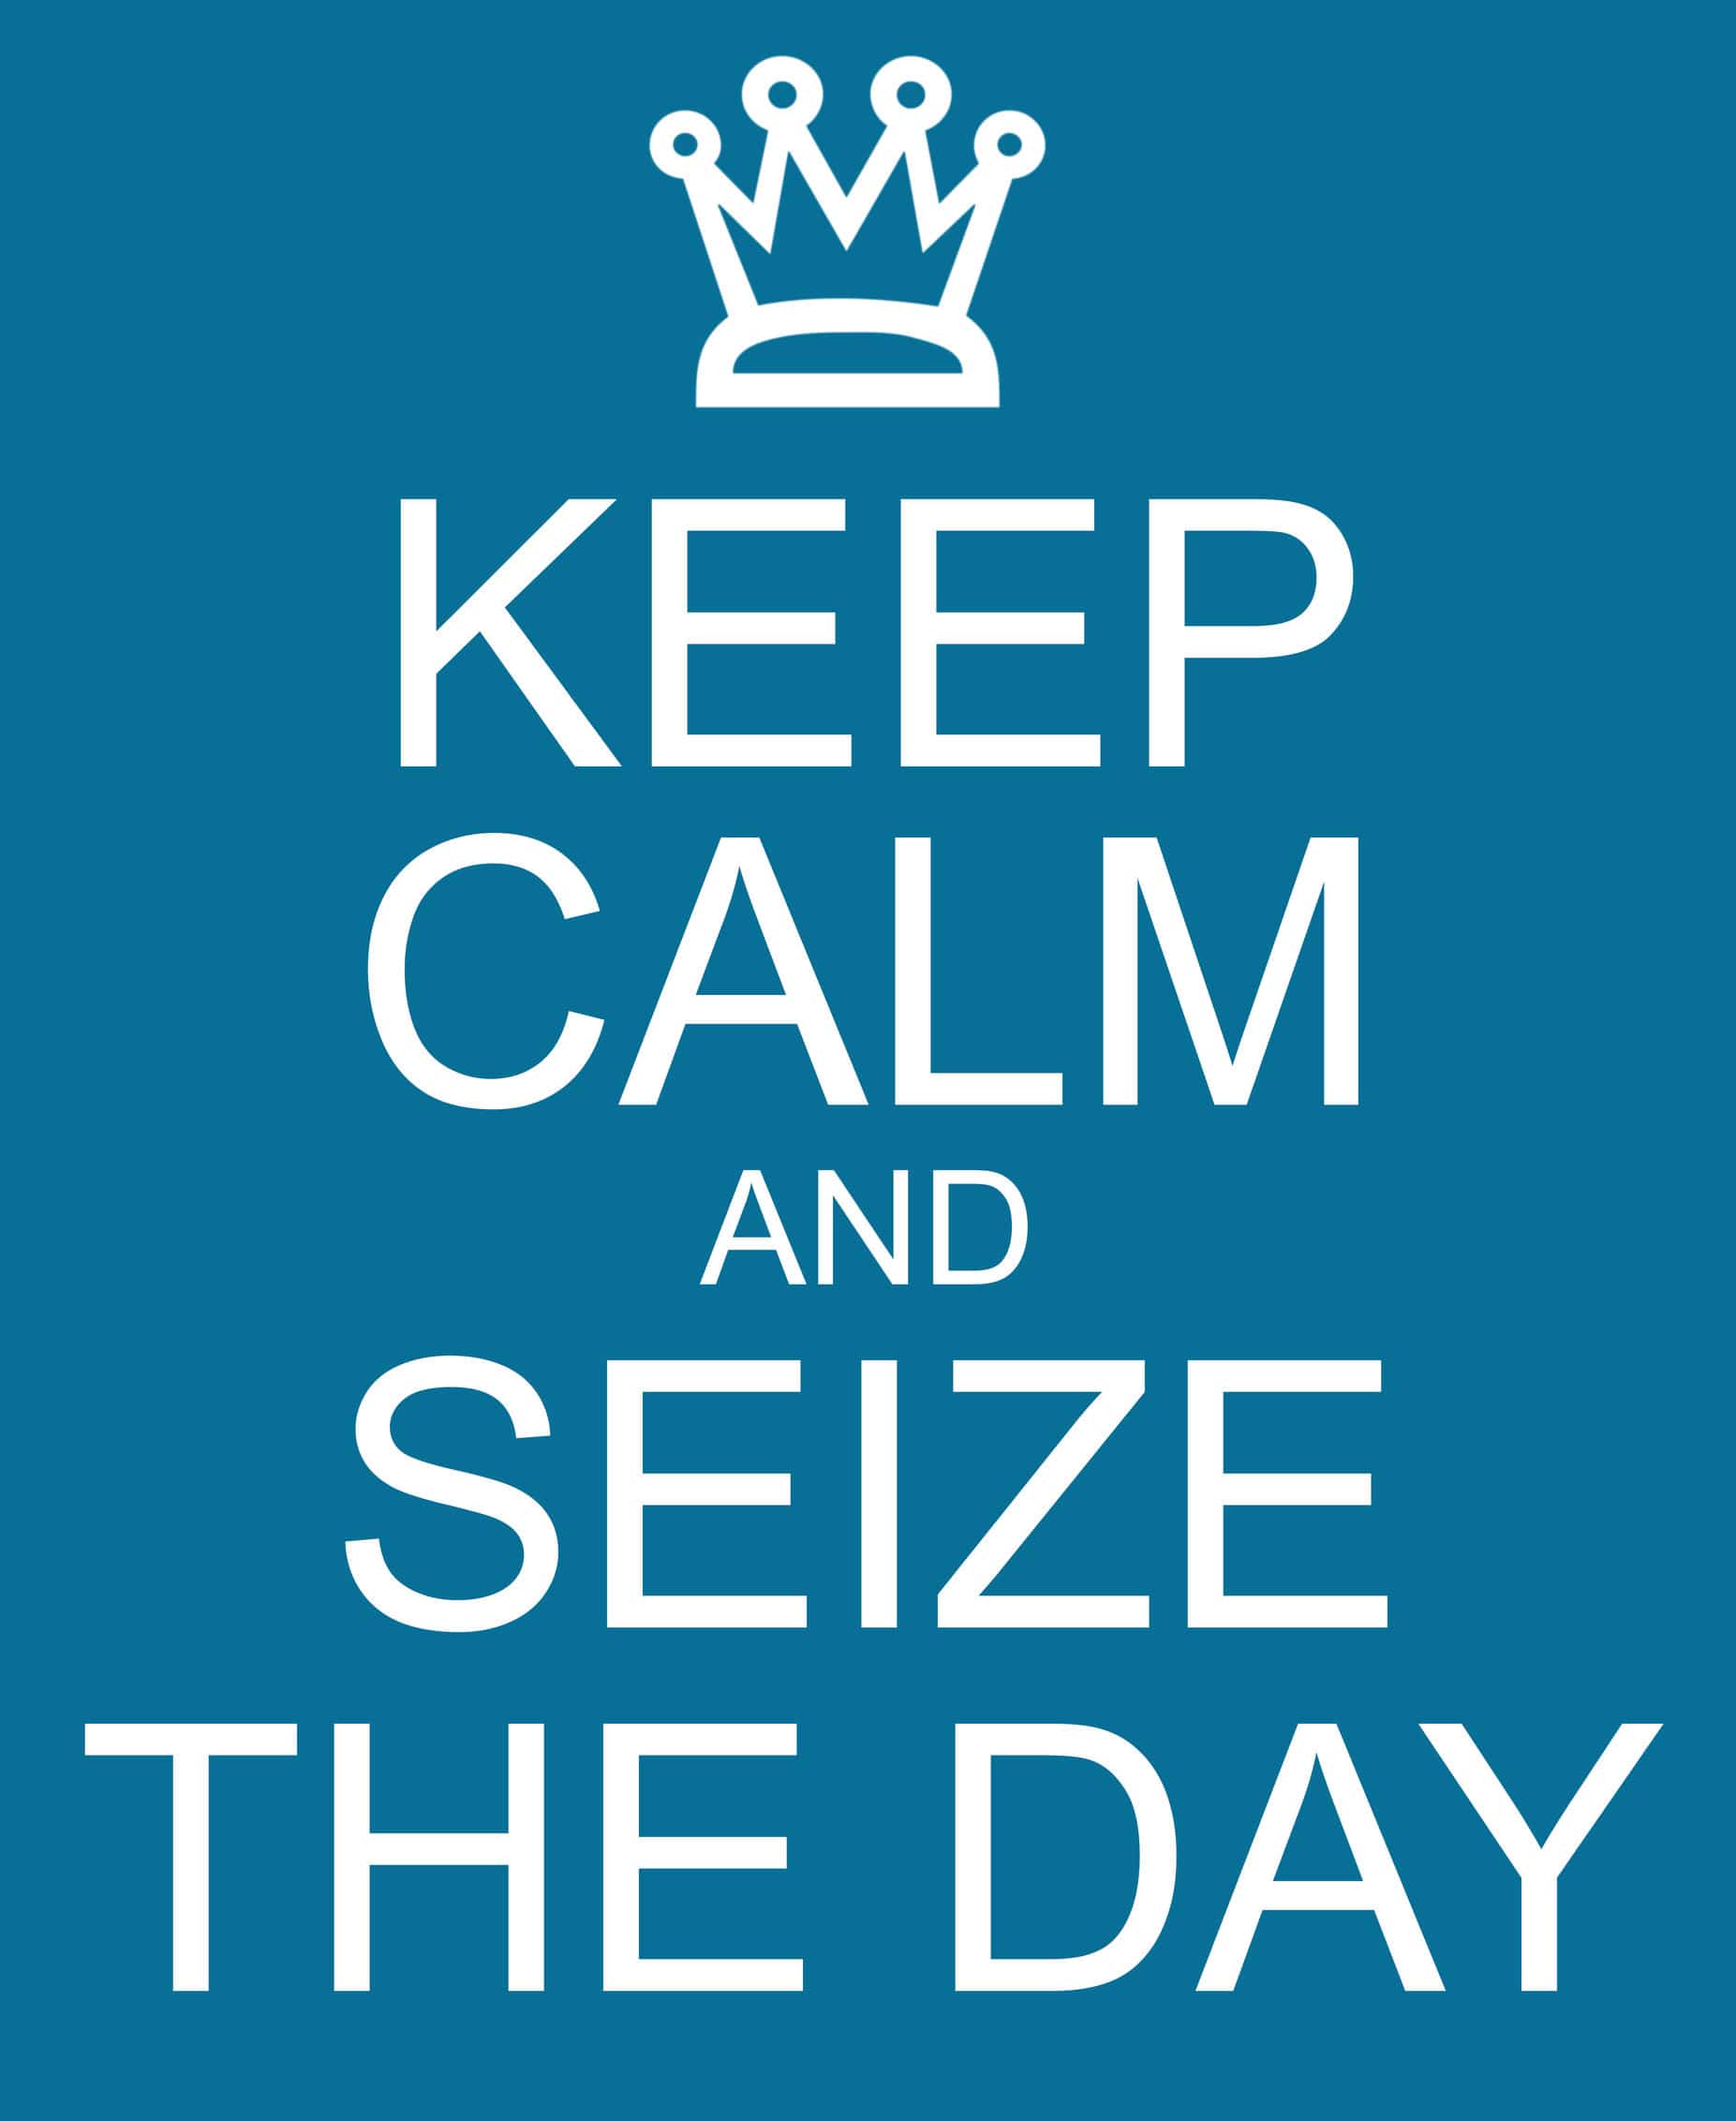 Keep calm and seize the day with a crown written on a blue sign making a great concept.